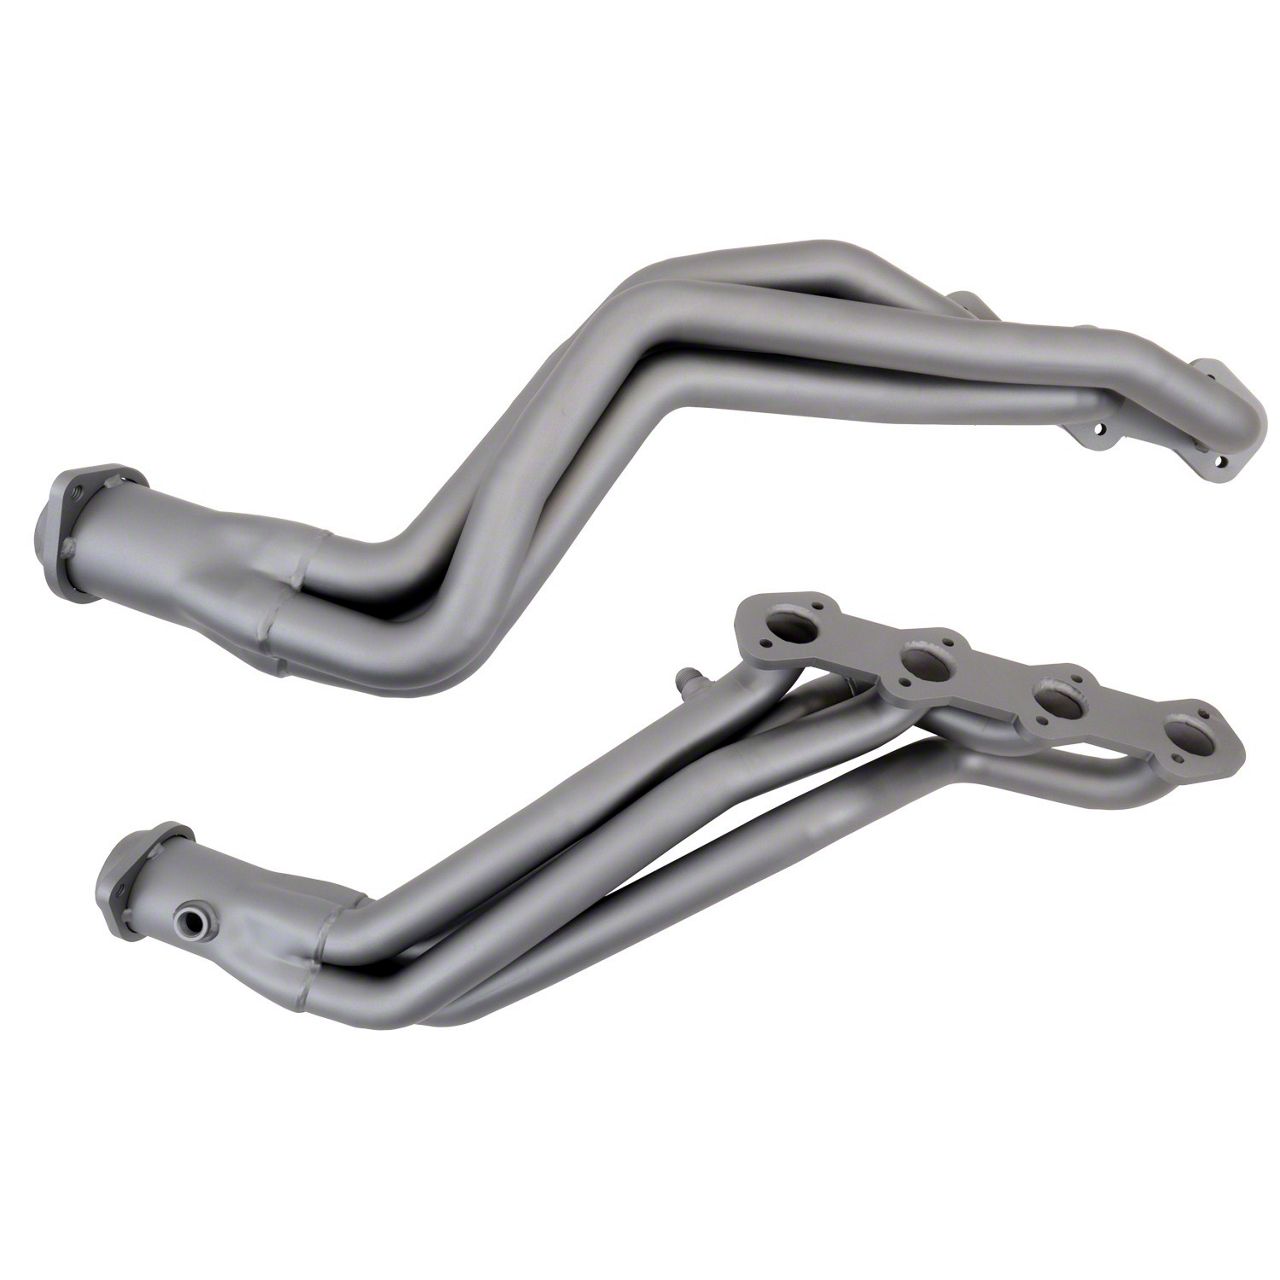 S//S Long Tube Exhaust Manifold Header For 96 97 98 99 00 01 02 03 04 Mustang Gt